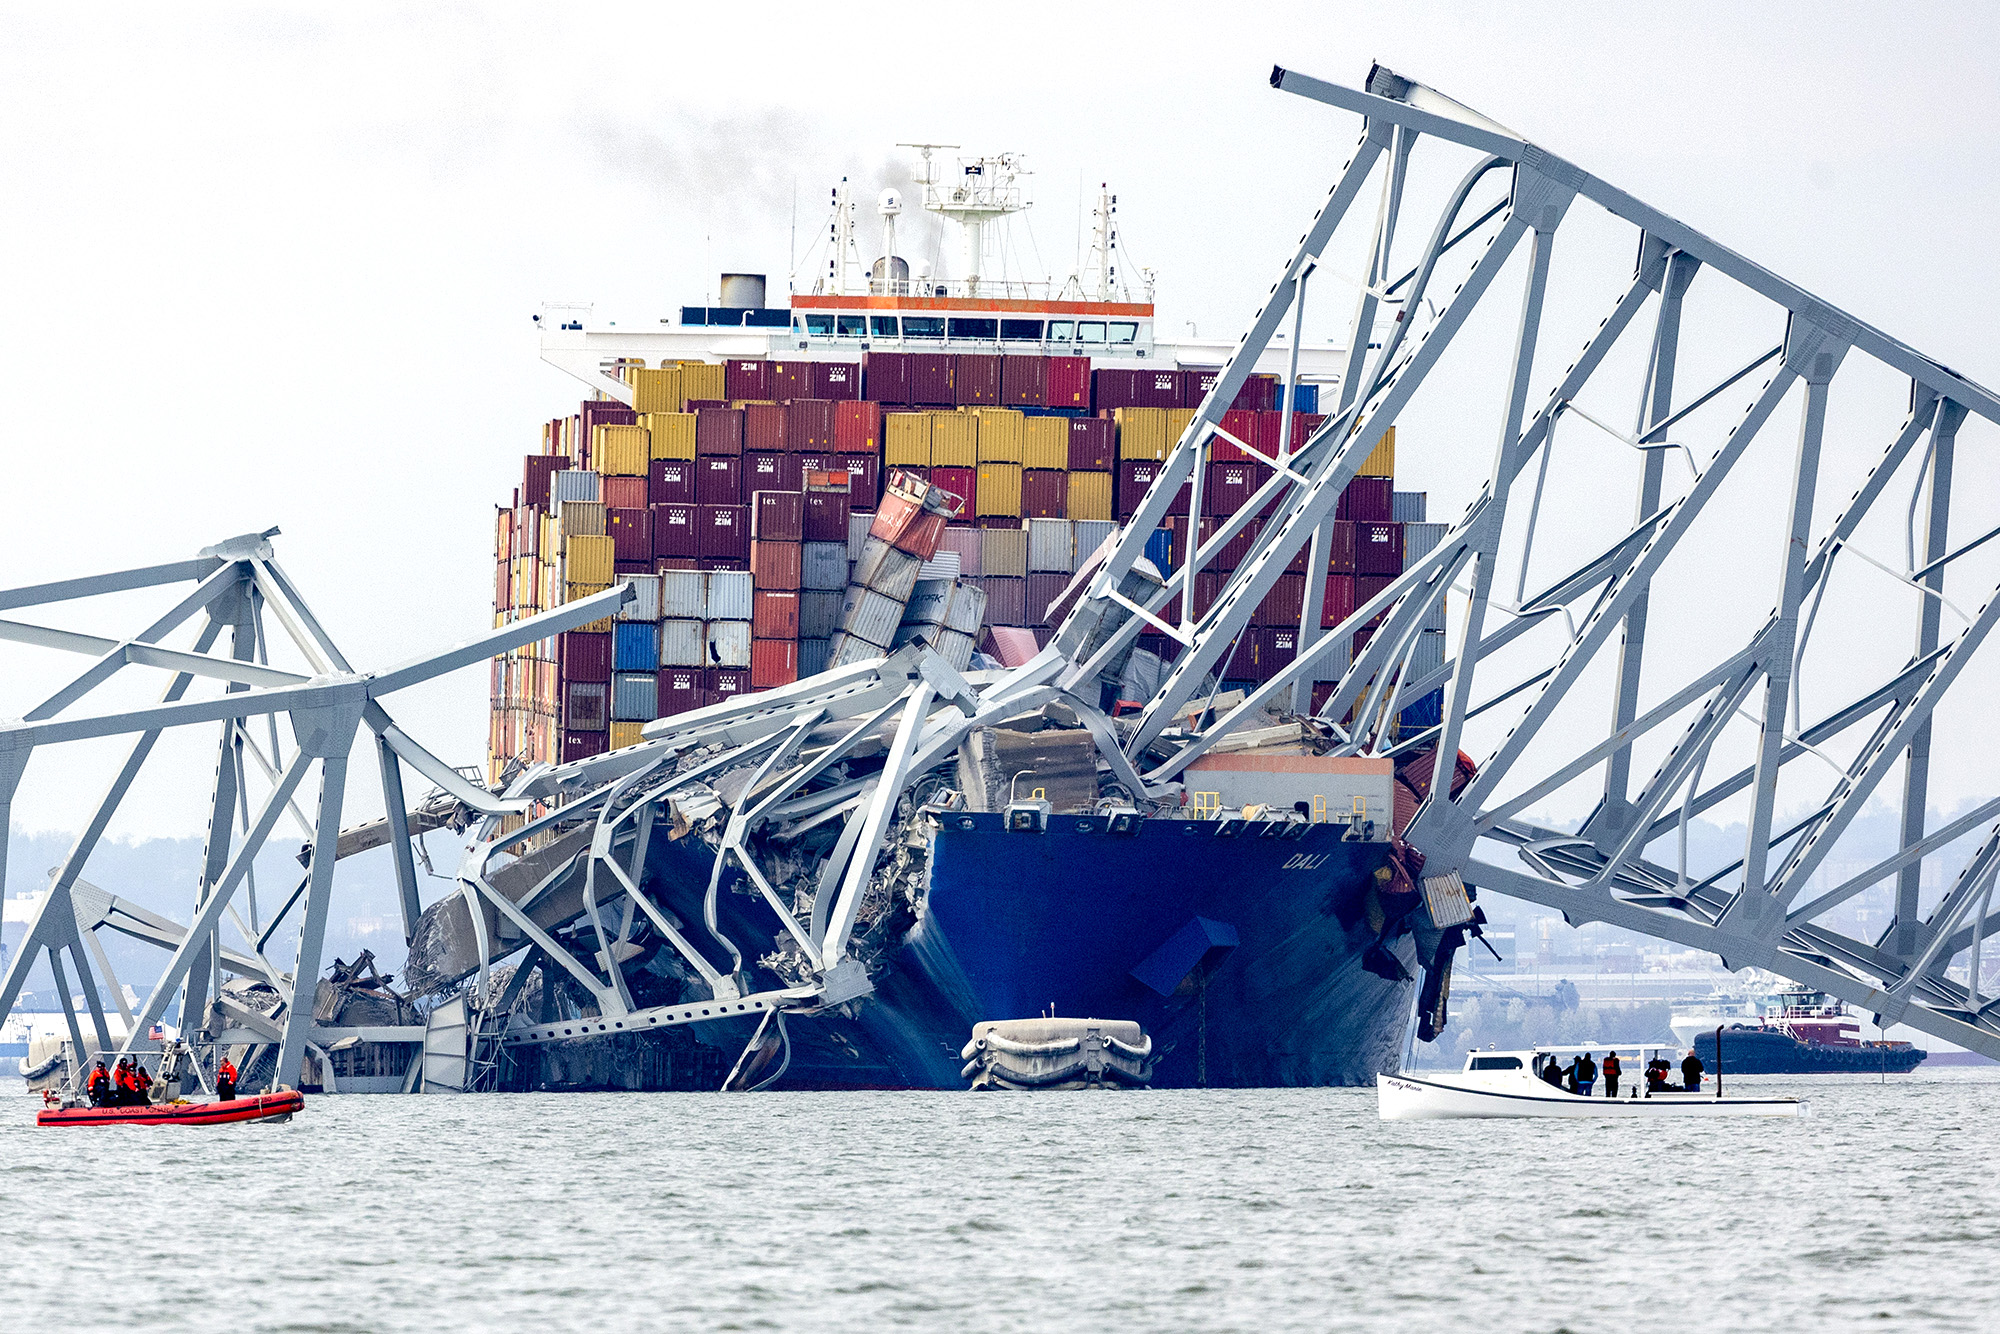 front on view of the MV Dali which the bridge collapsed on the bow of the ship. Multi-colour containers lean on an angle. smaller boats surround the ship.